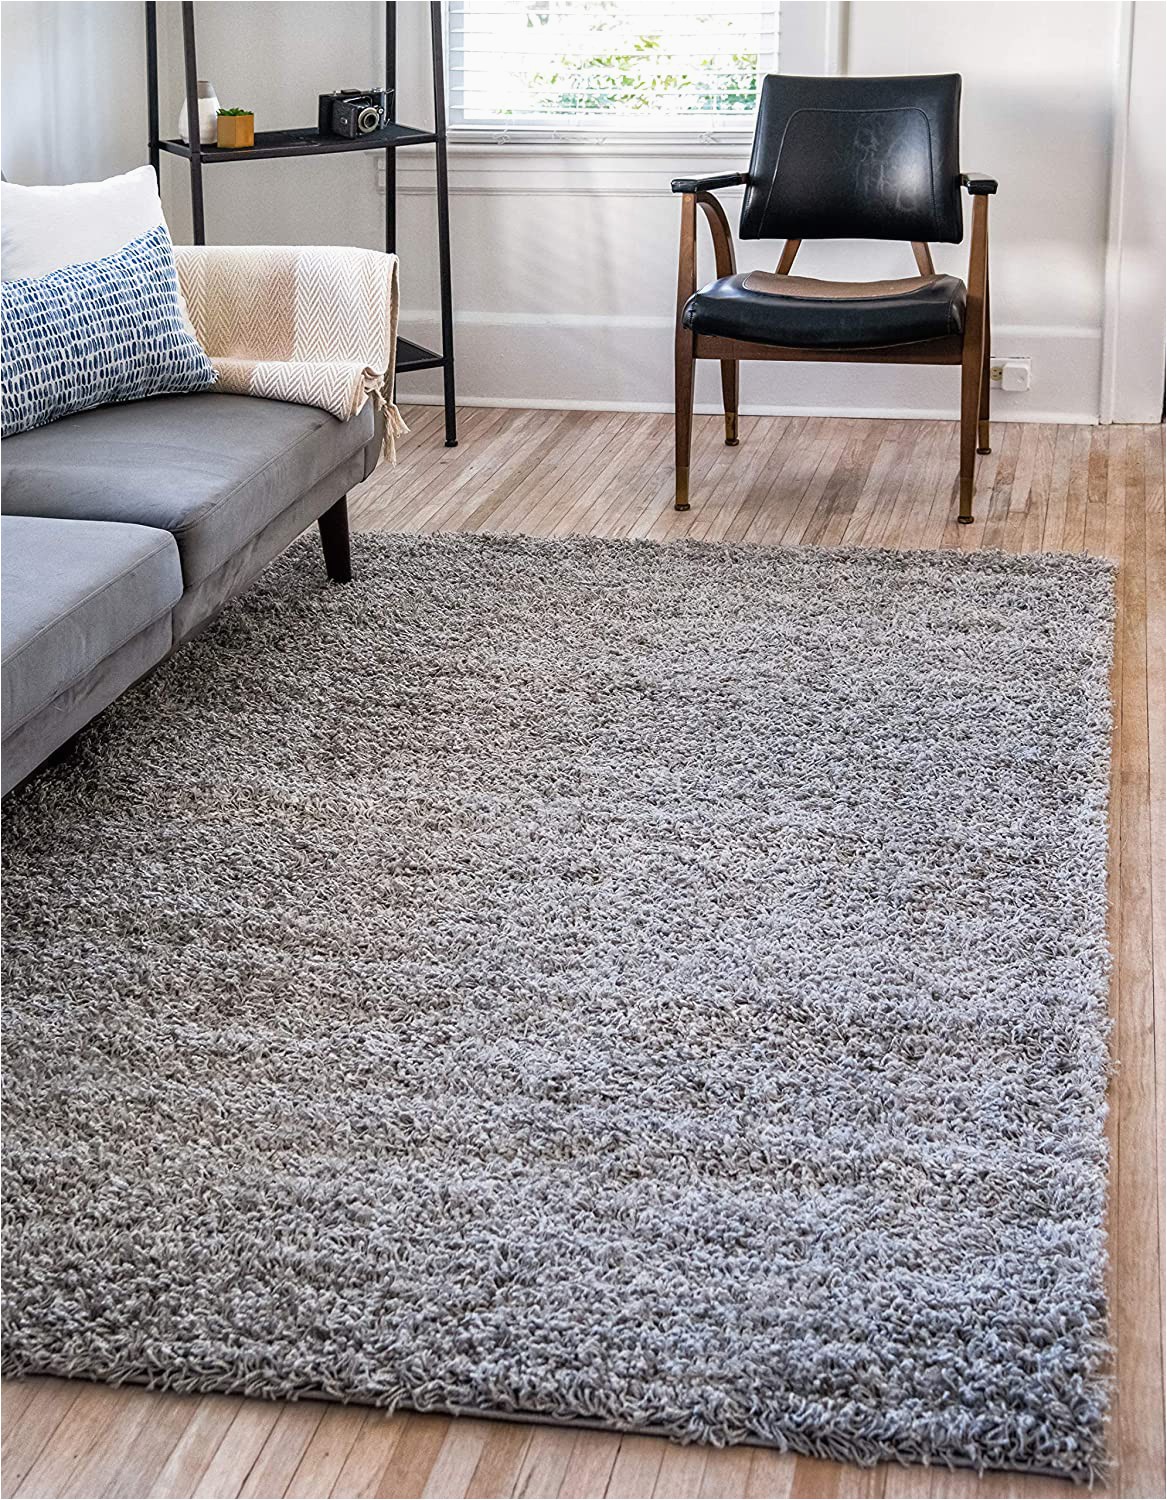 Area Rugs 30 X 45 Unique Loom solo solid Shag Collection Modern Plush Cloud Gray area Rug 5 0 X 8 0